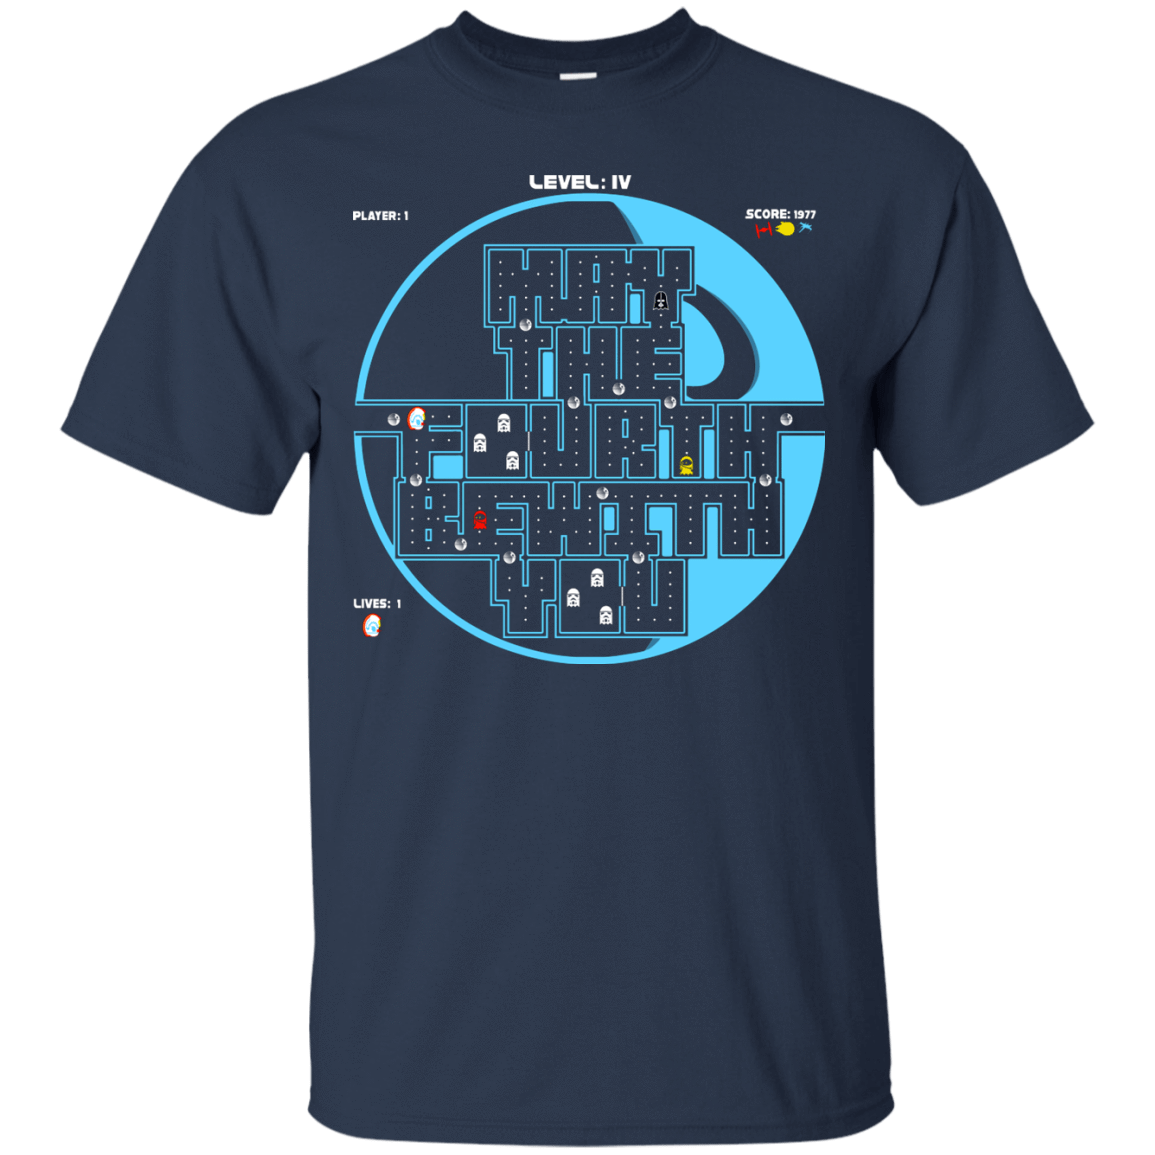 T-Shirts Navy / S Pacman May The Fourth T-Shirt